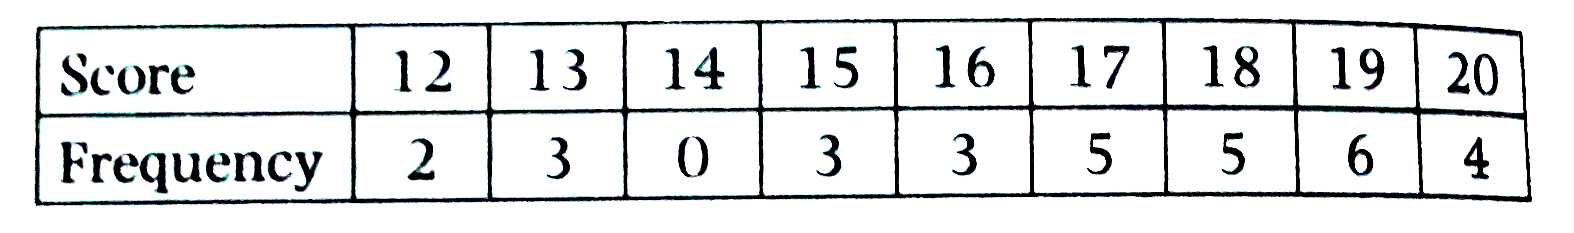 The table below gives the frequency with which various scores were obtained on  a 20-question  written section of a drivers education test .      The mode of the data is